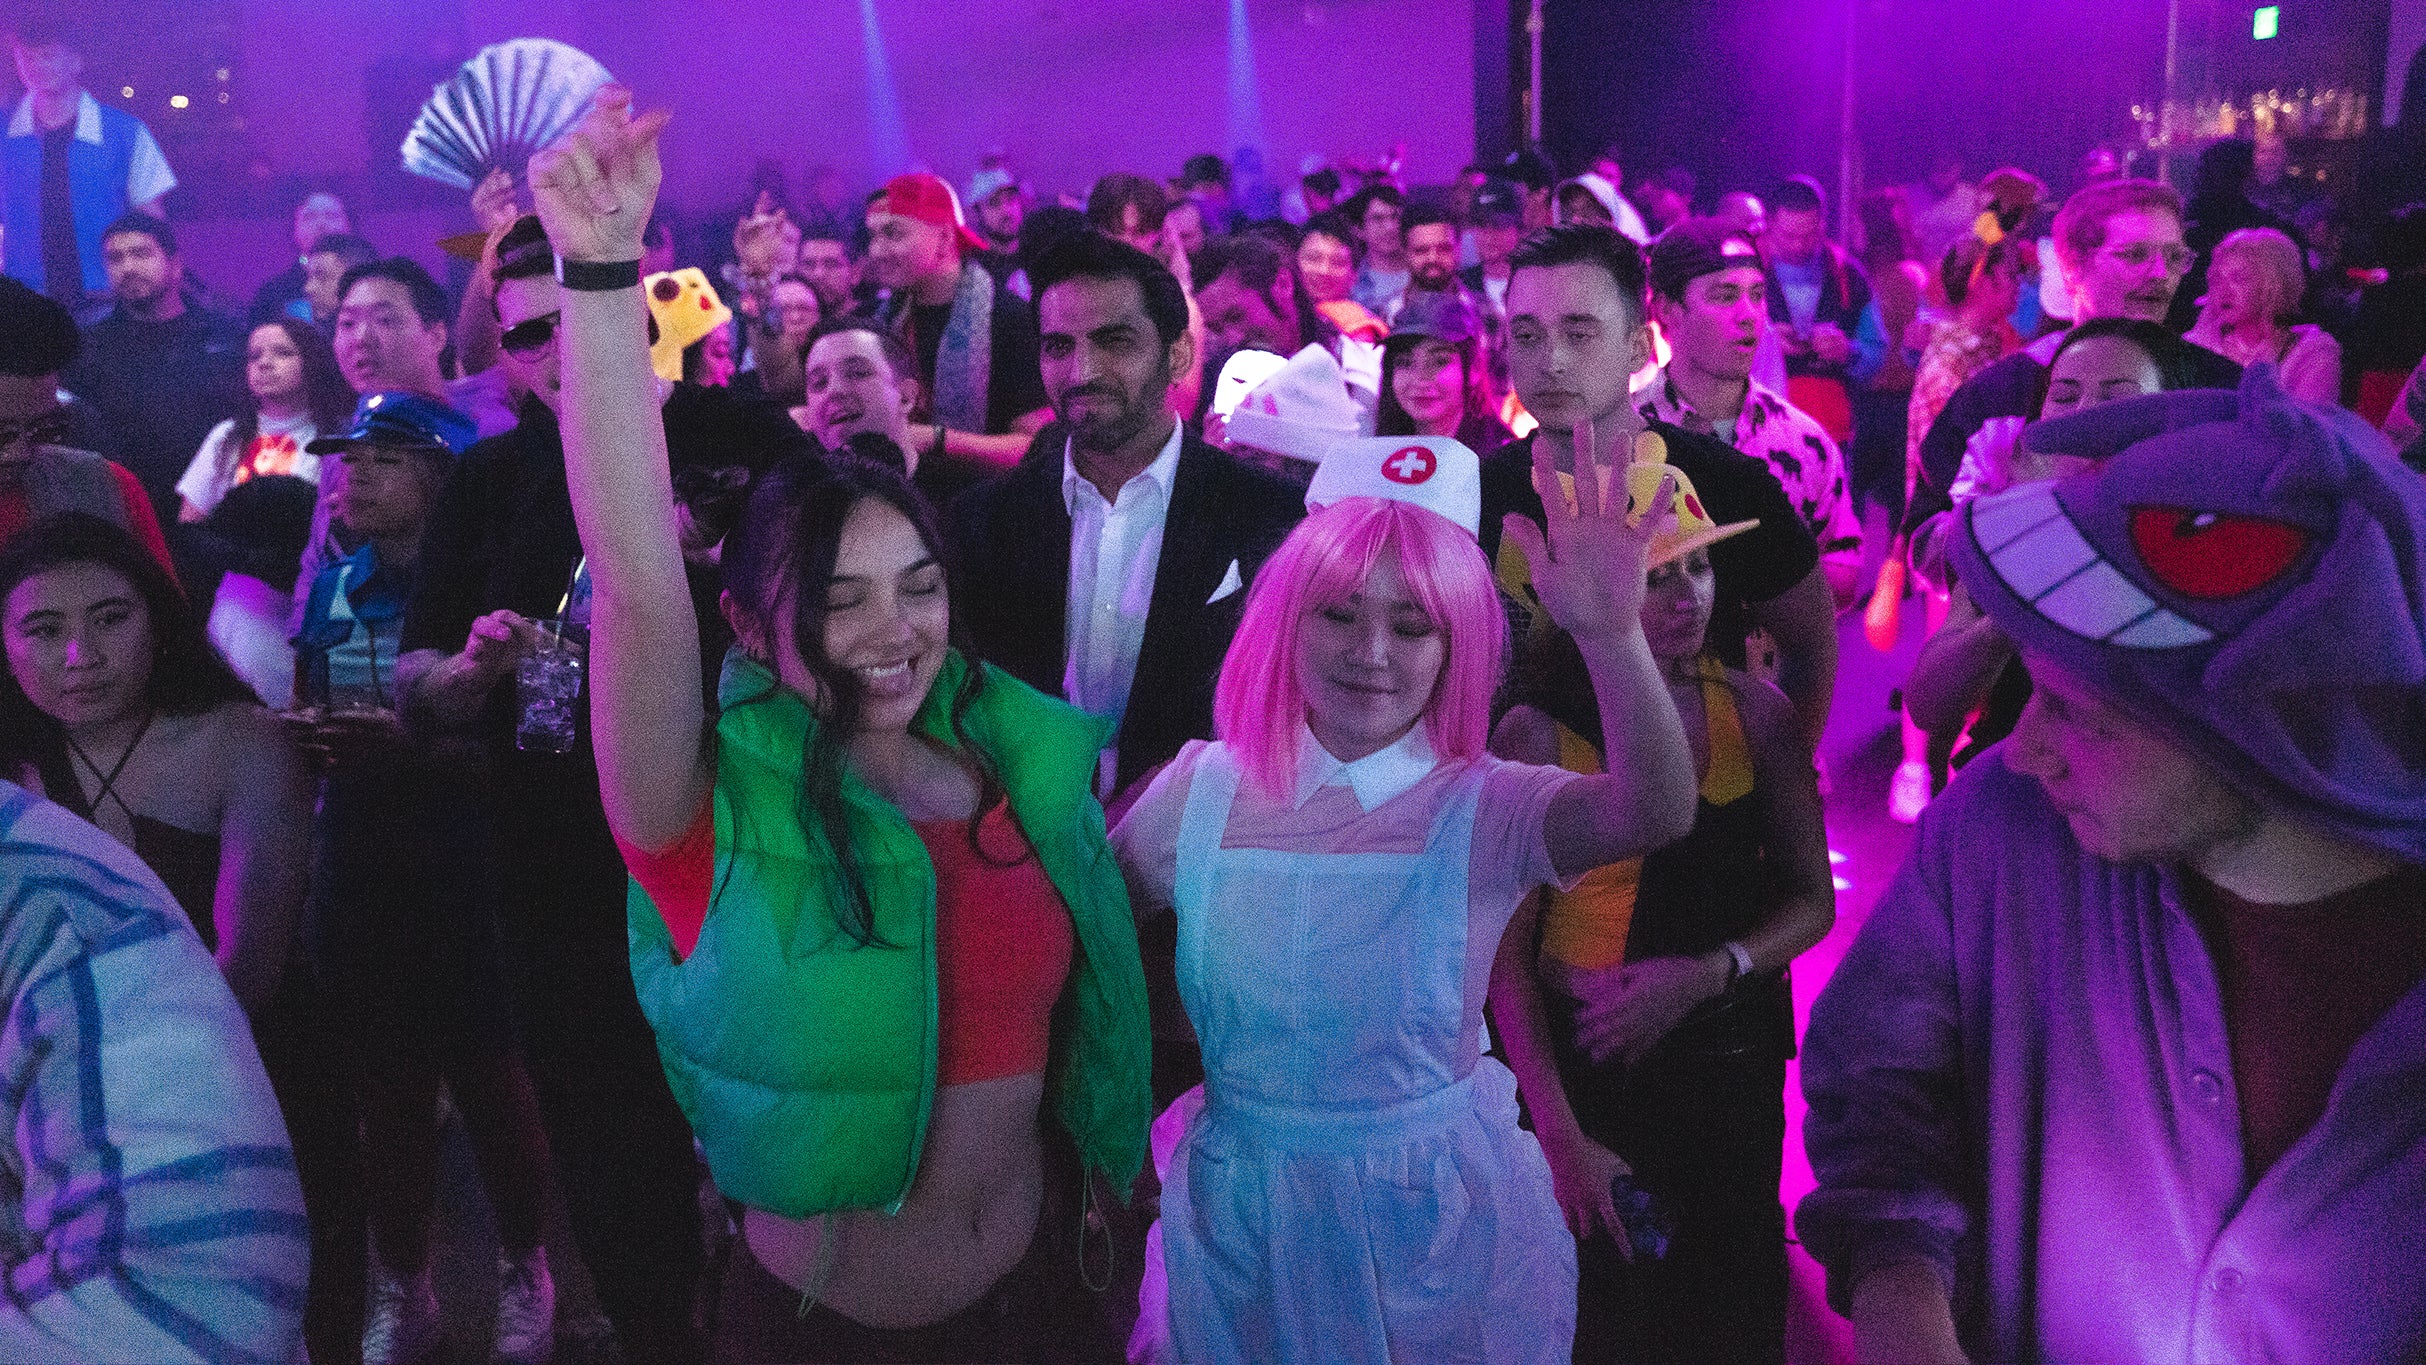 The Kawaii Rave - 18+ Welcome With Valid ID in San Diego promo photo for Live Nation presale offer code